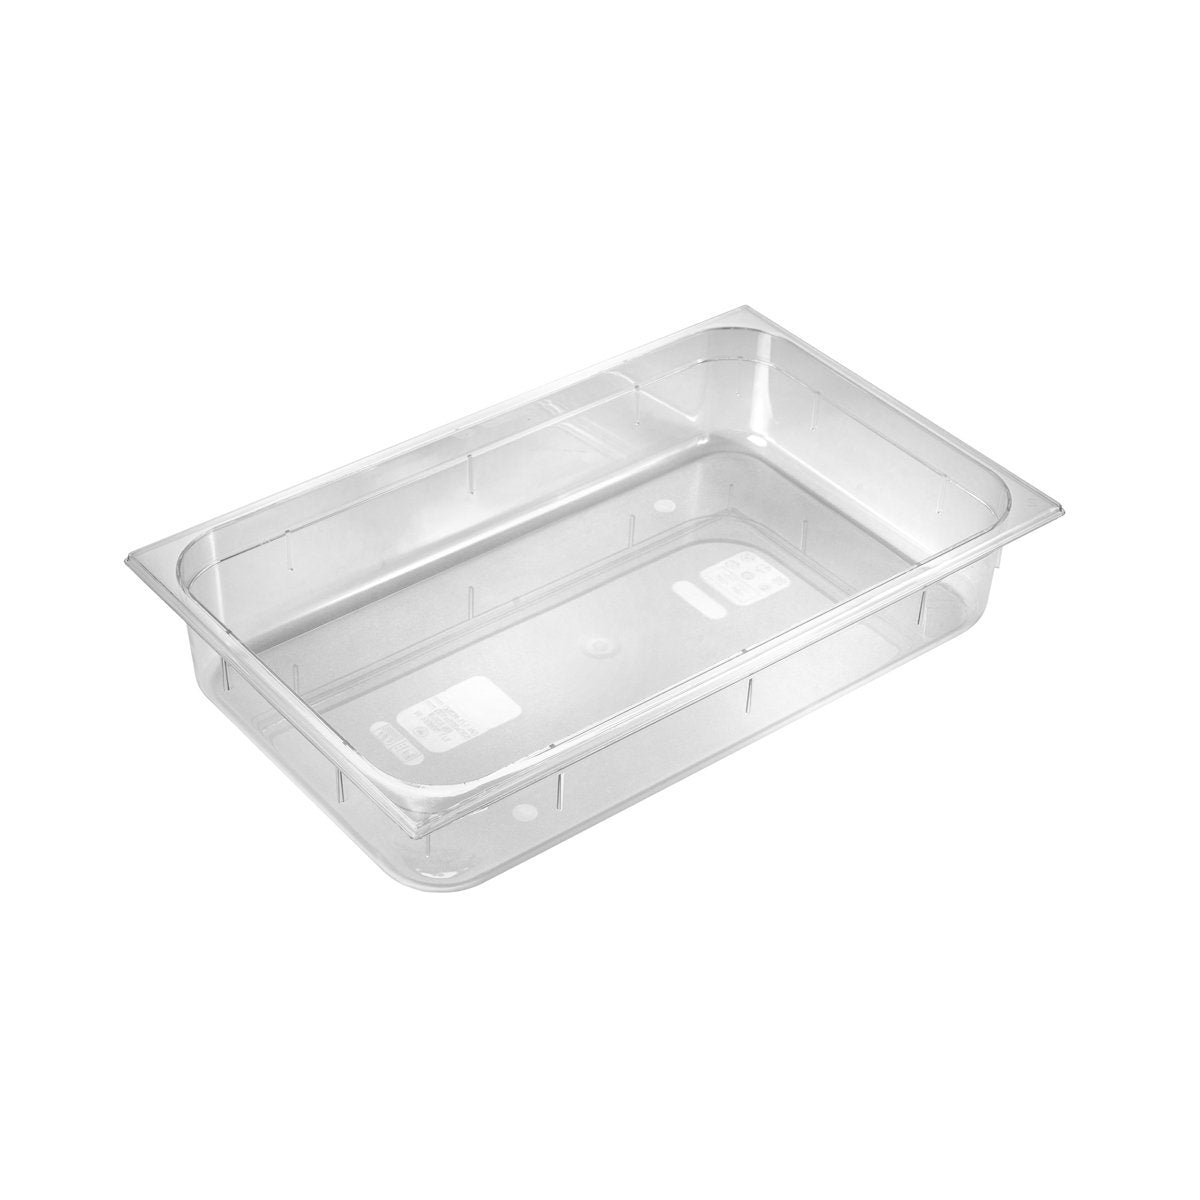 PC-11100CL Inox Macel Gastronorm Pan Polycarbonate Clear 1/1 Size 100mm Tomkin Australia Hospitality Supplies